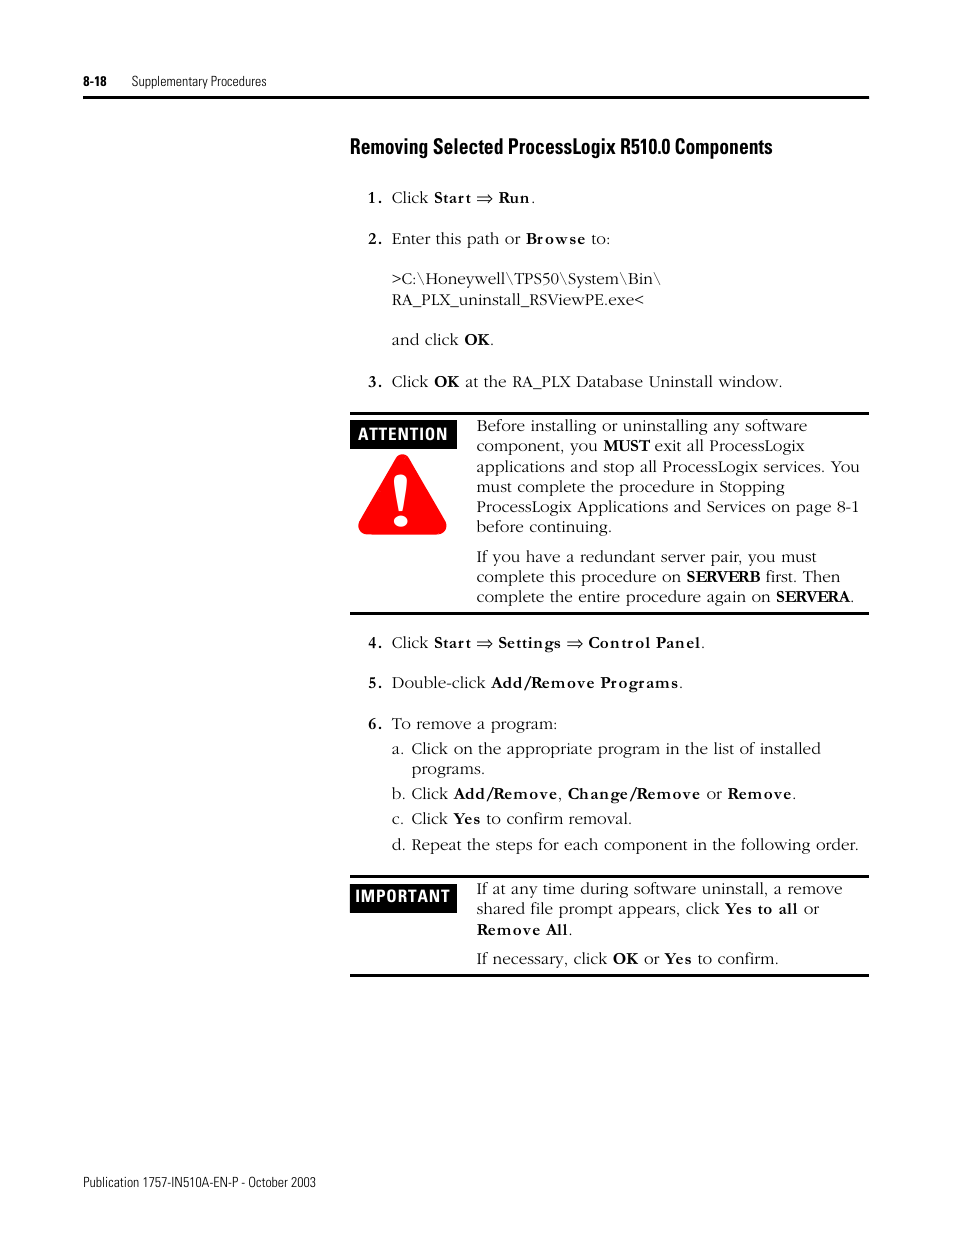 Removing selected processlogix r510.0 components | Rockwell Automation 1757-SWKIT5100 ProcessLogix R510.0 Installation and Upgrade Guide User Manual | Page 220 / 271